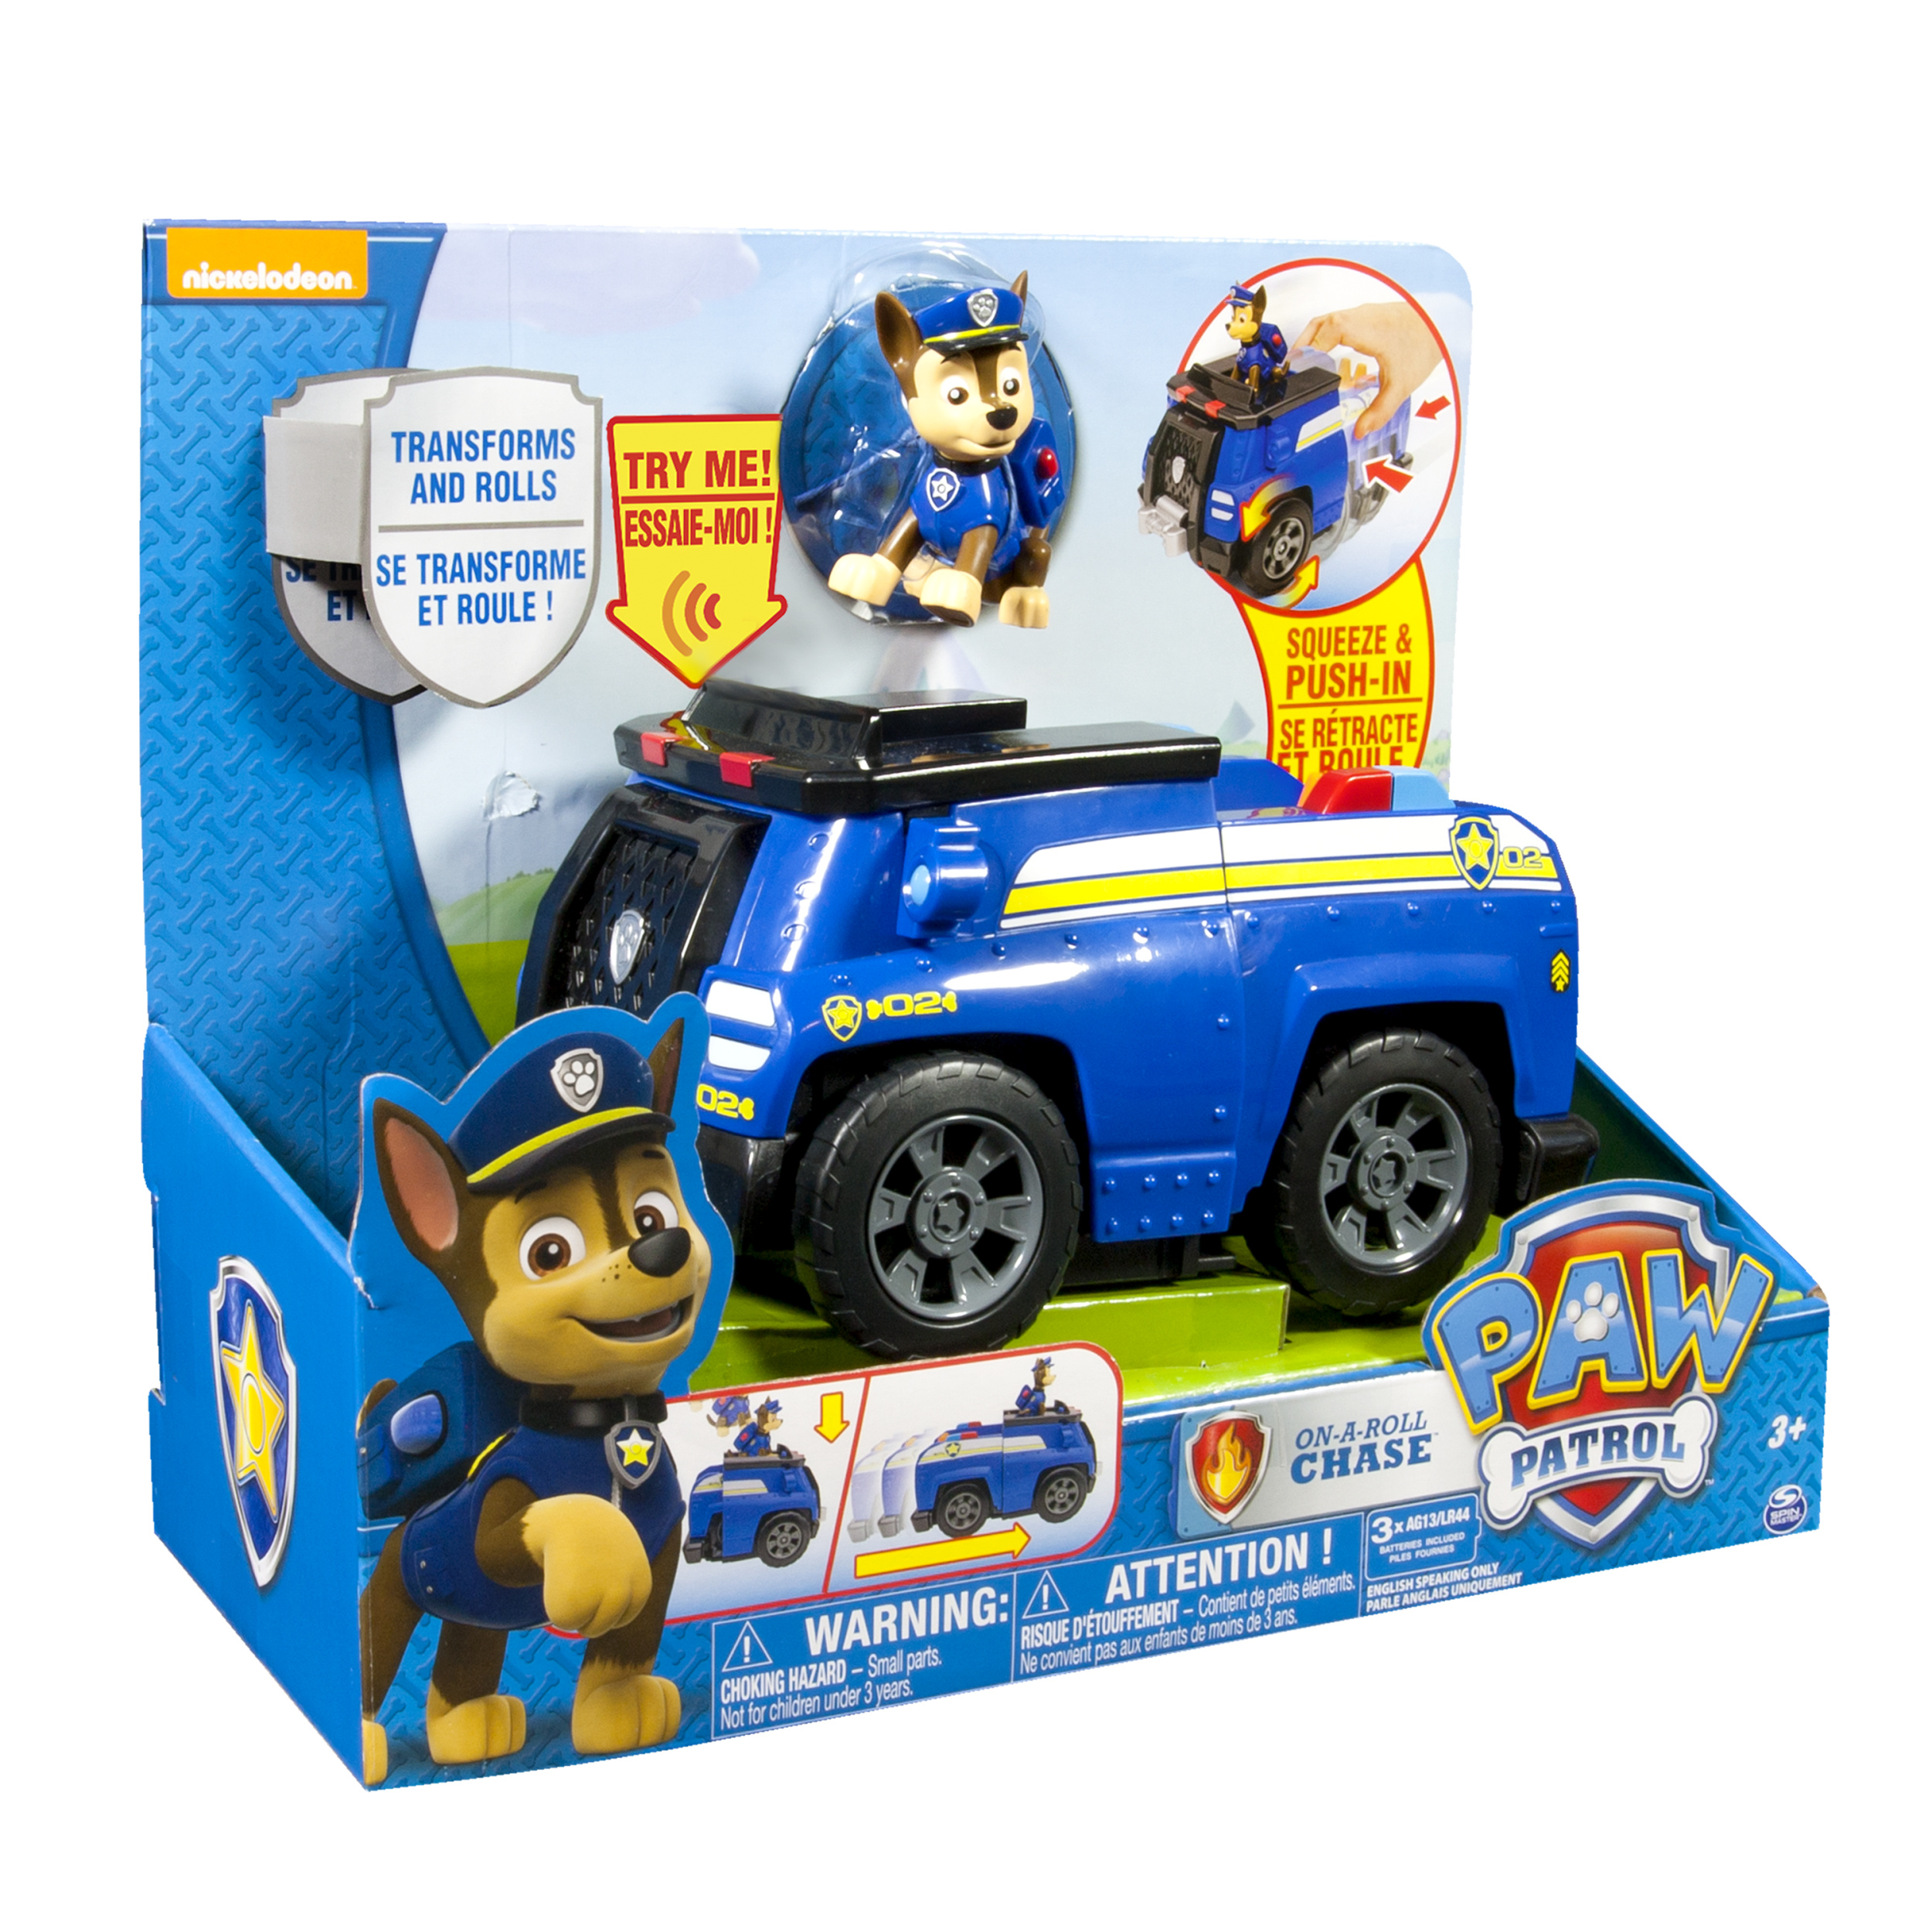 Paw Patrol On a Roll Chase, Figure and Vehicle with Sounds - image 5 of 5